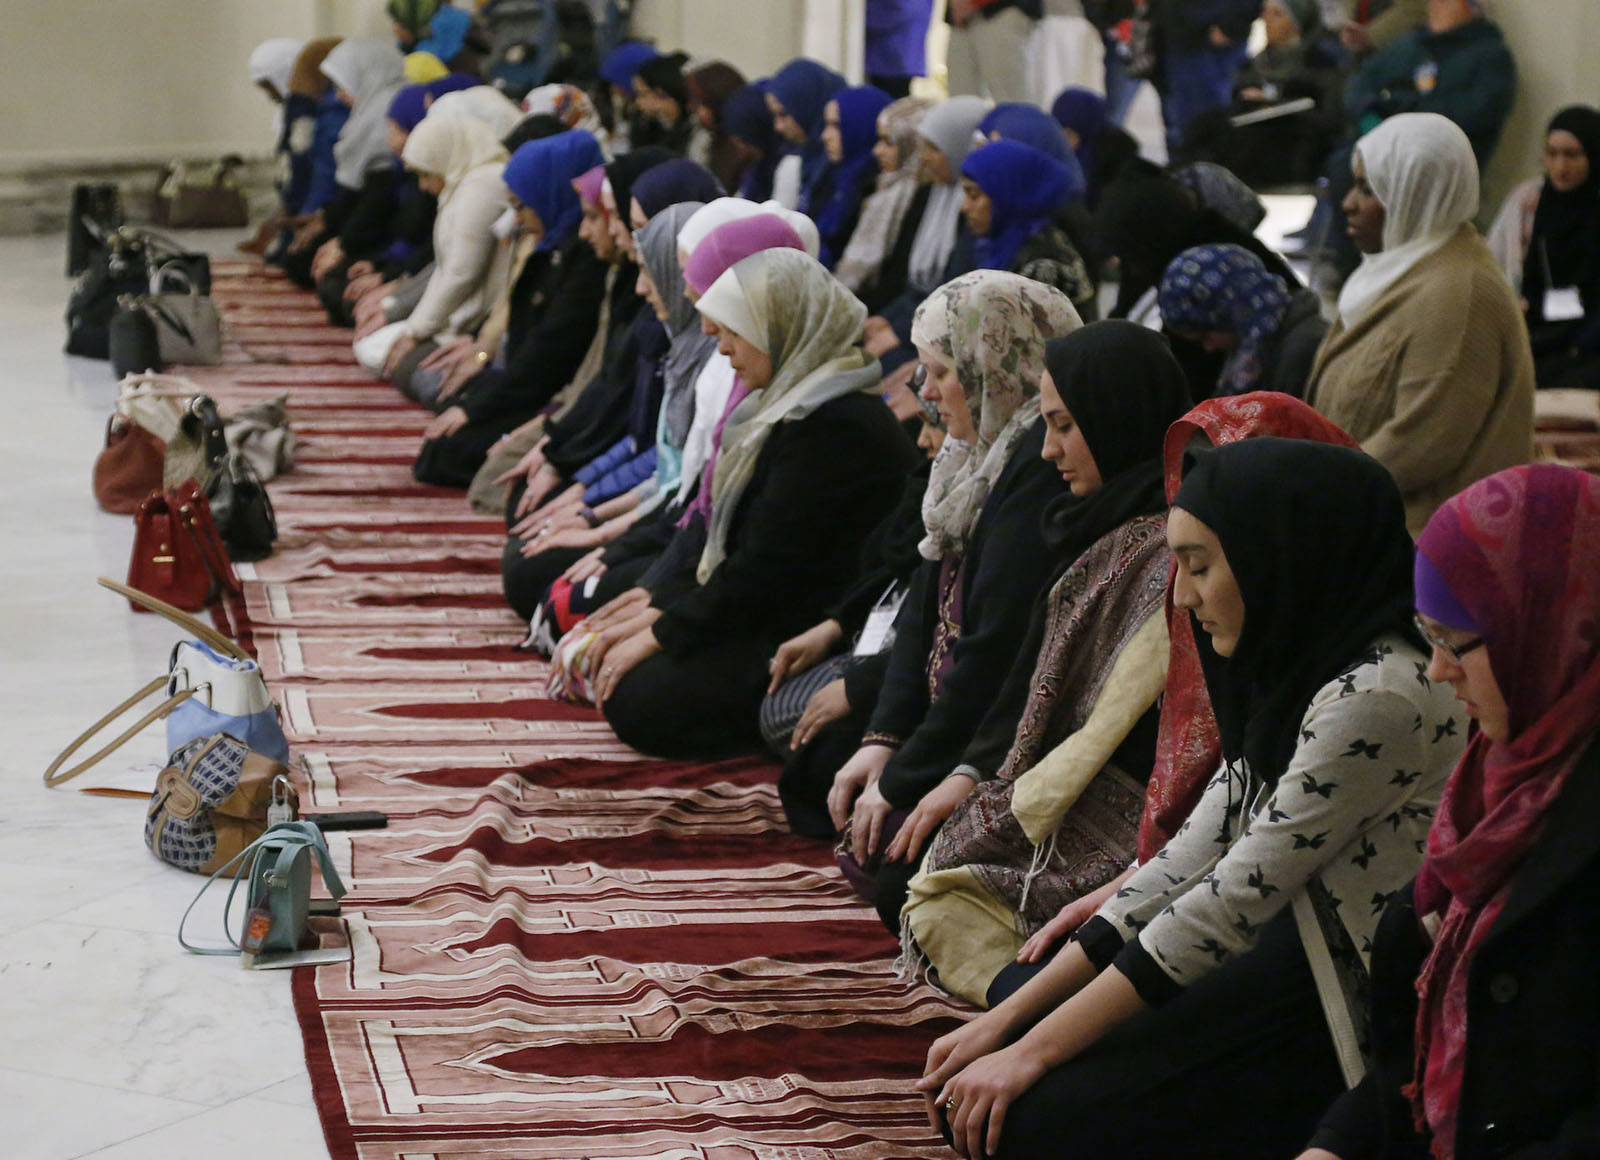 Prayer carpets in mosques have a row of arches. (AP Photo/Sue Ogrocki)